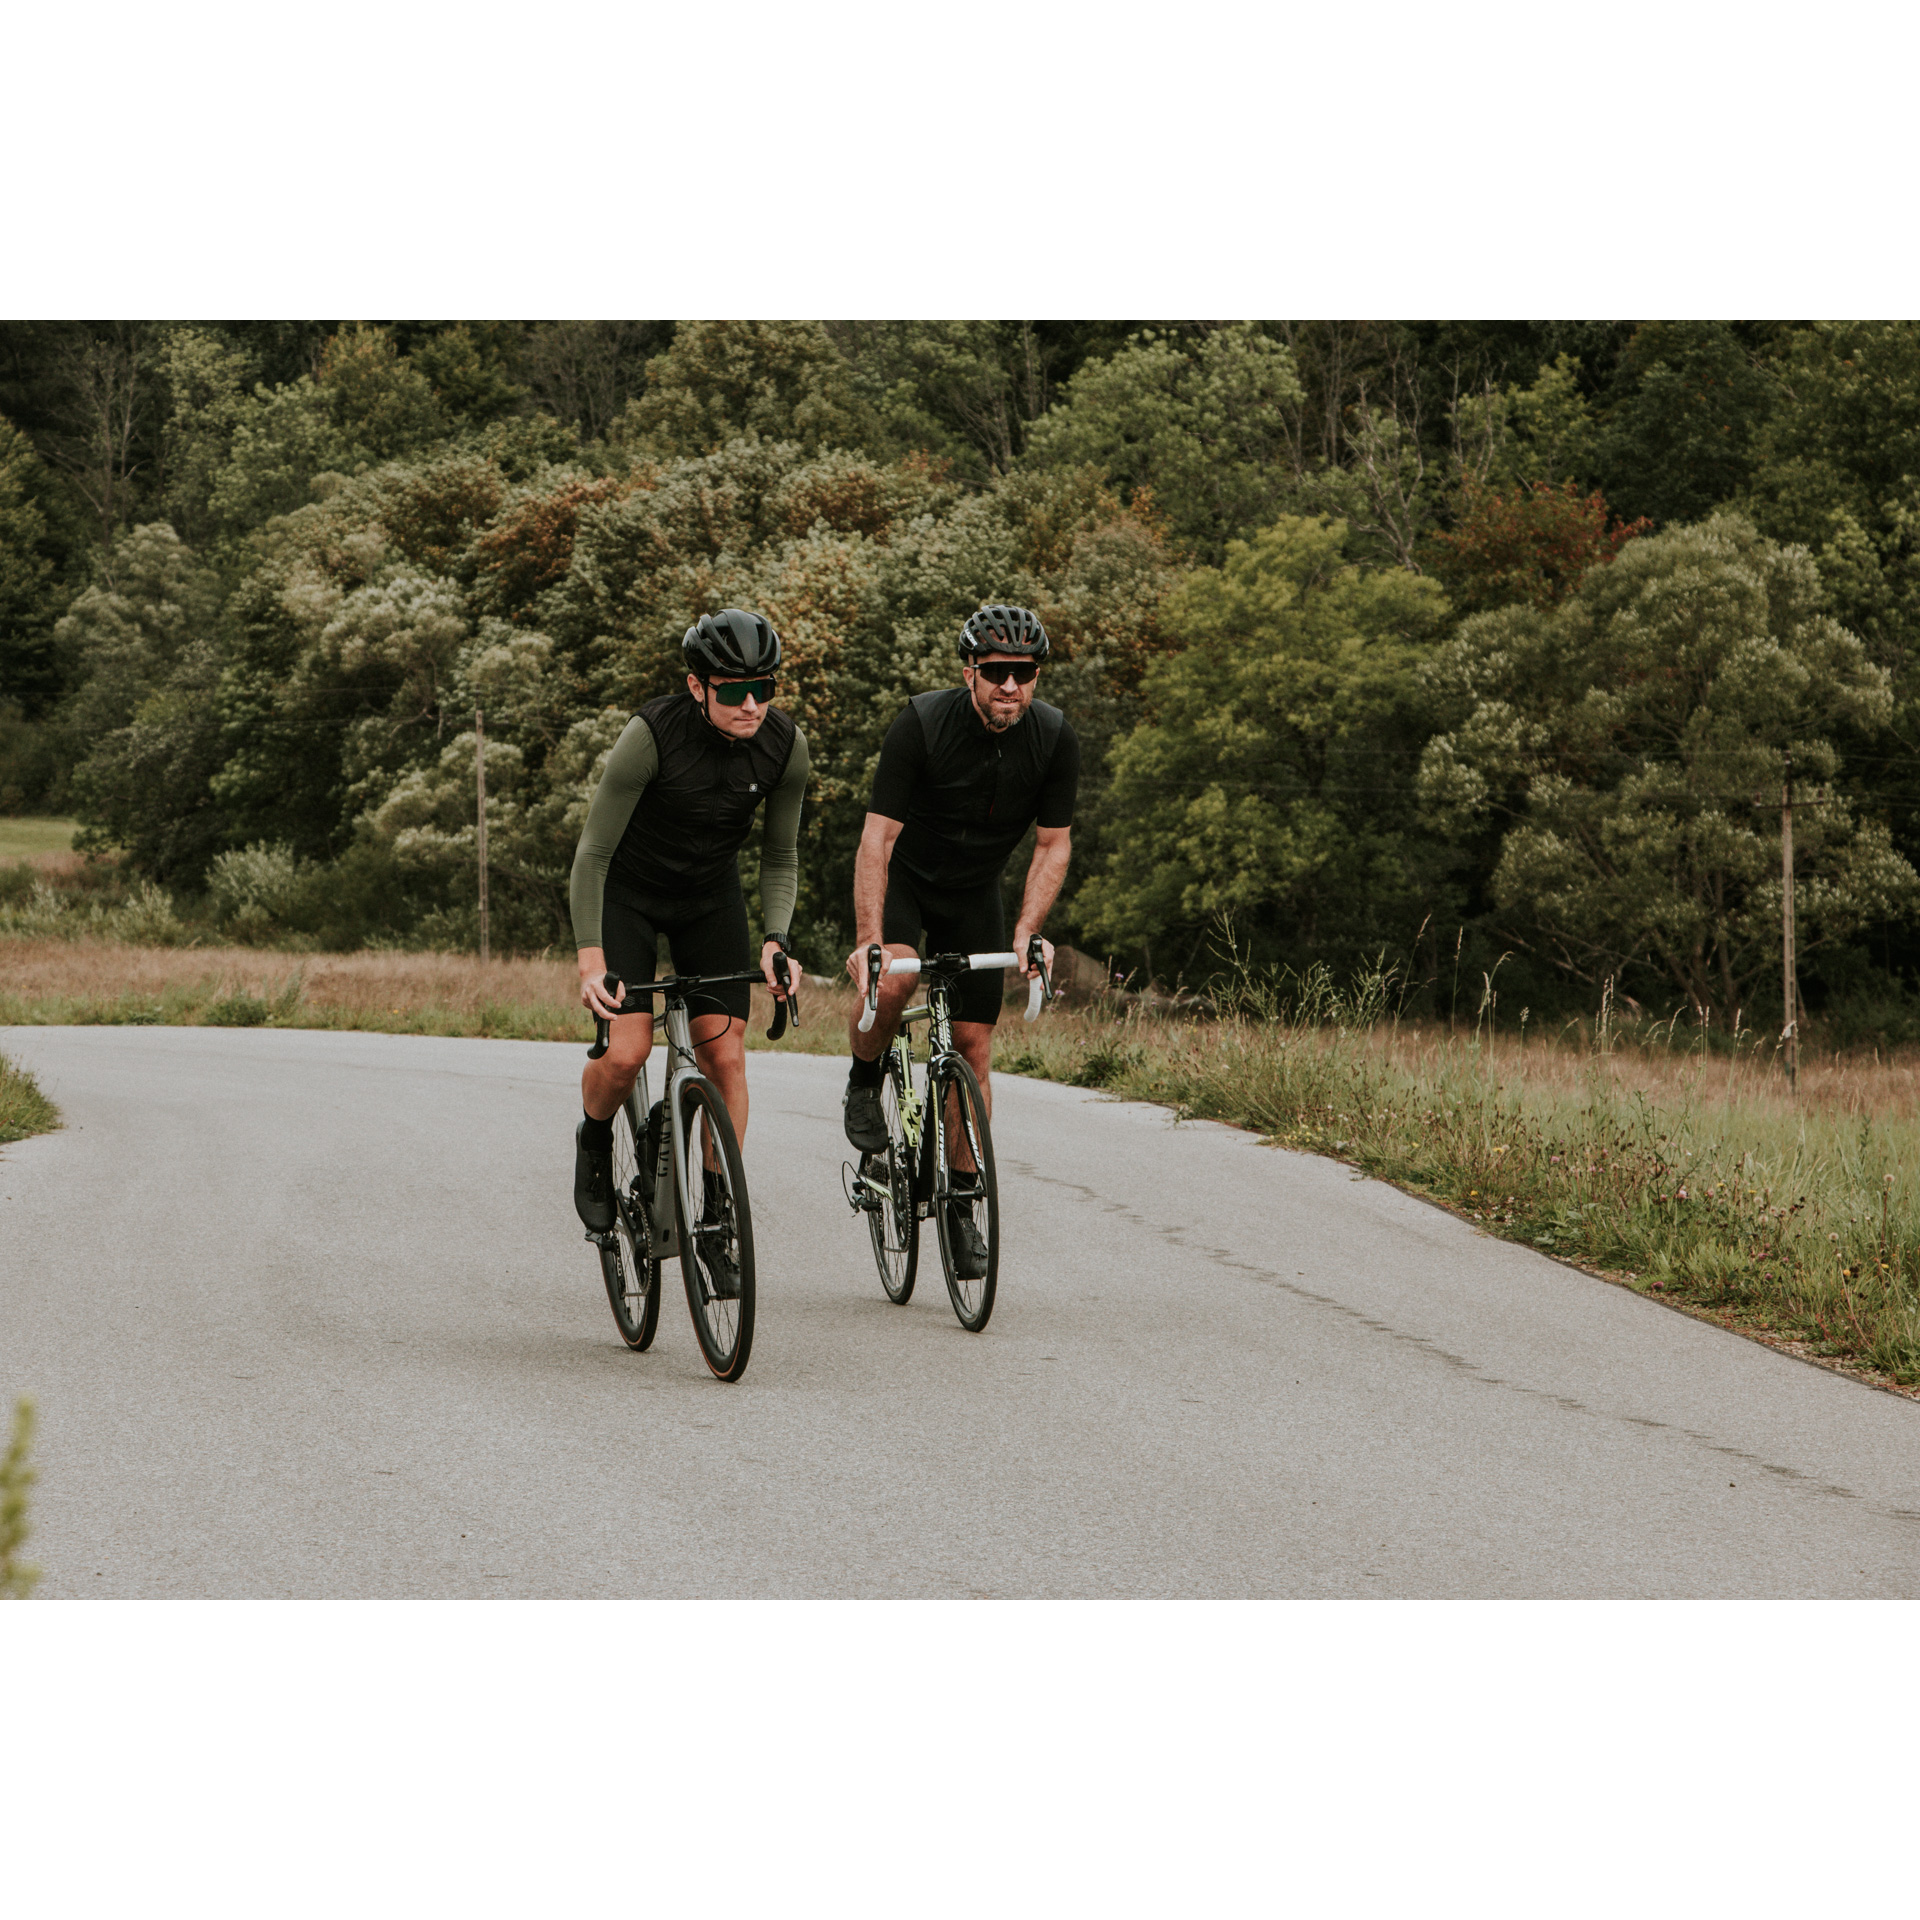 Two cyclists in black clothes and helmets riding an asphalt road against the background of a green forest